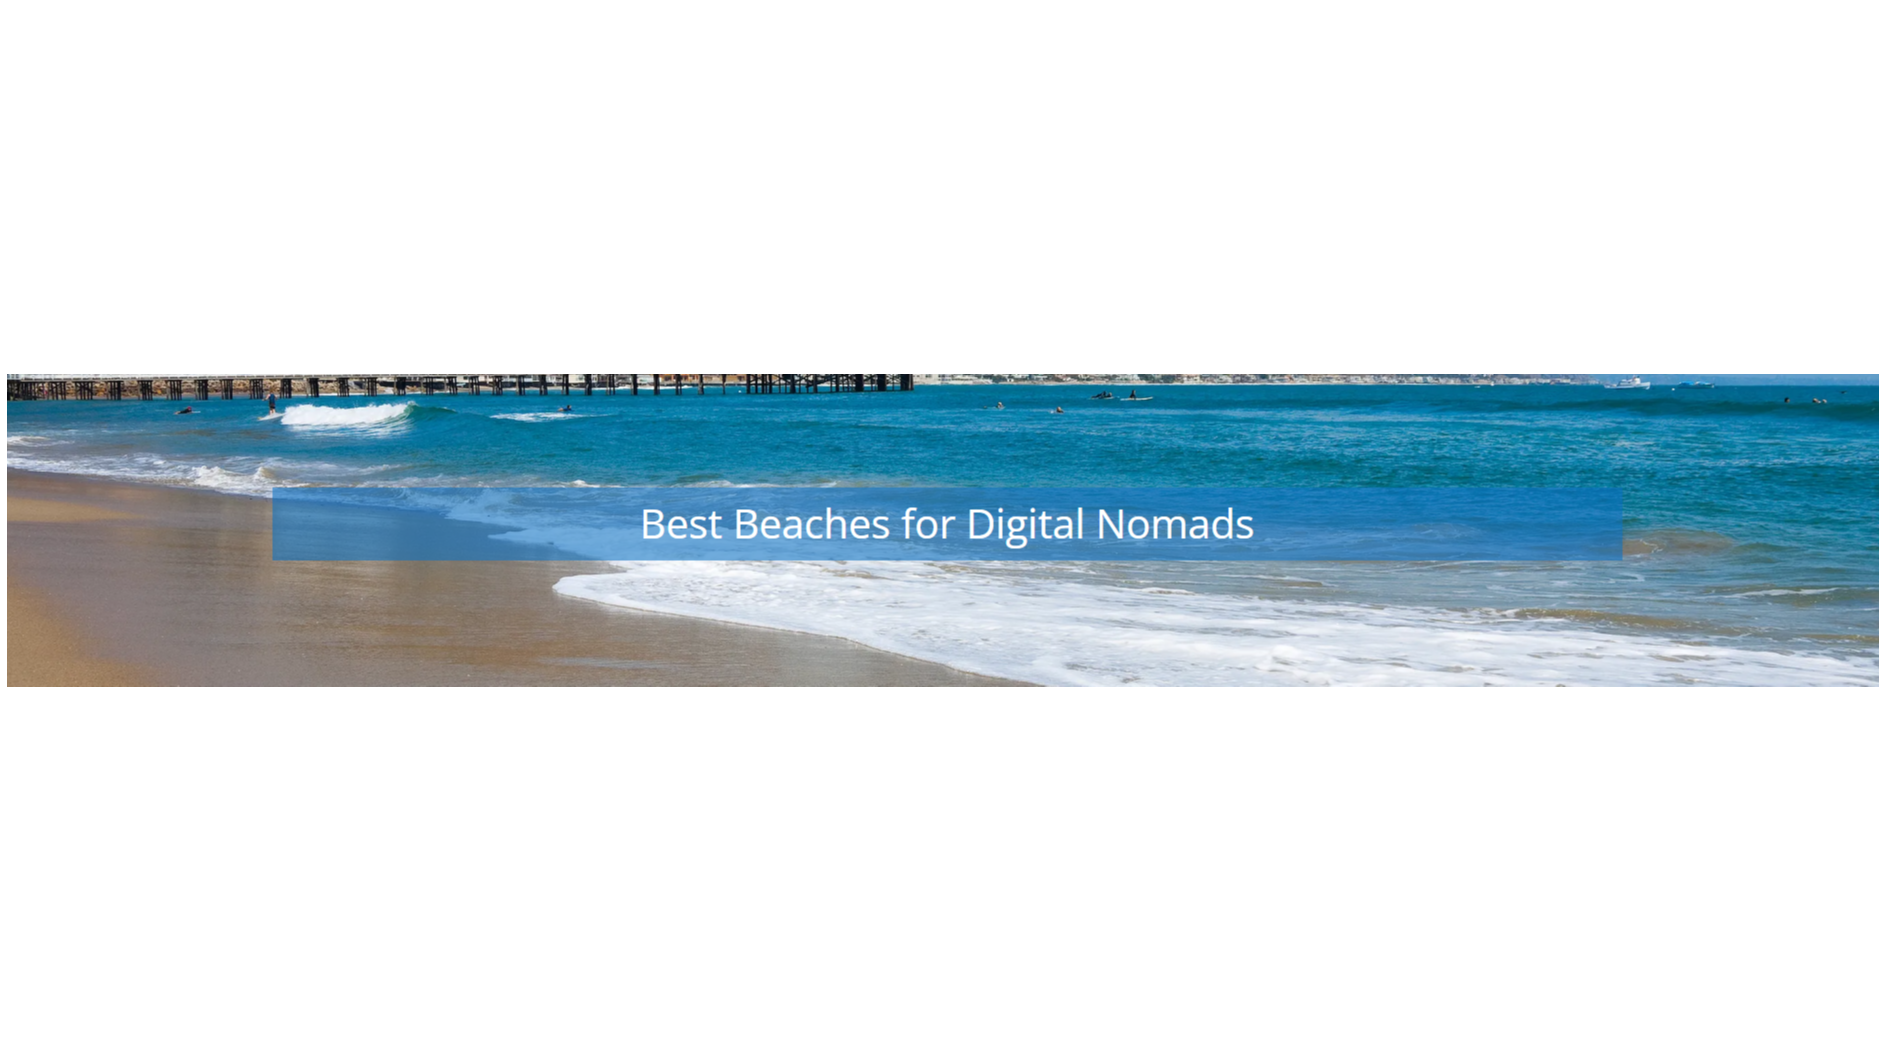 Phuket Beach Review 2023: Best Beaches For Remote Workers Analyzed In New Report